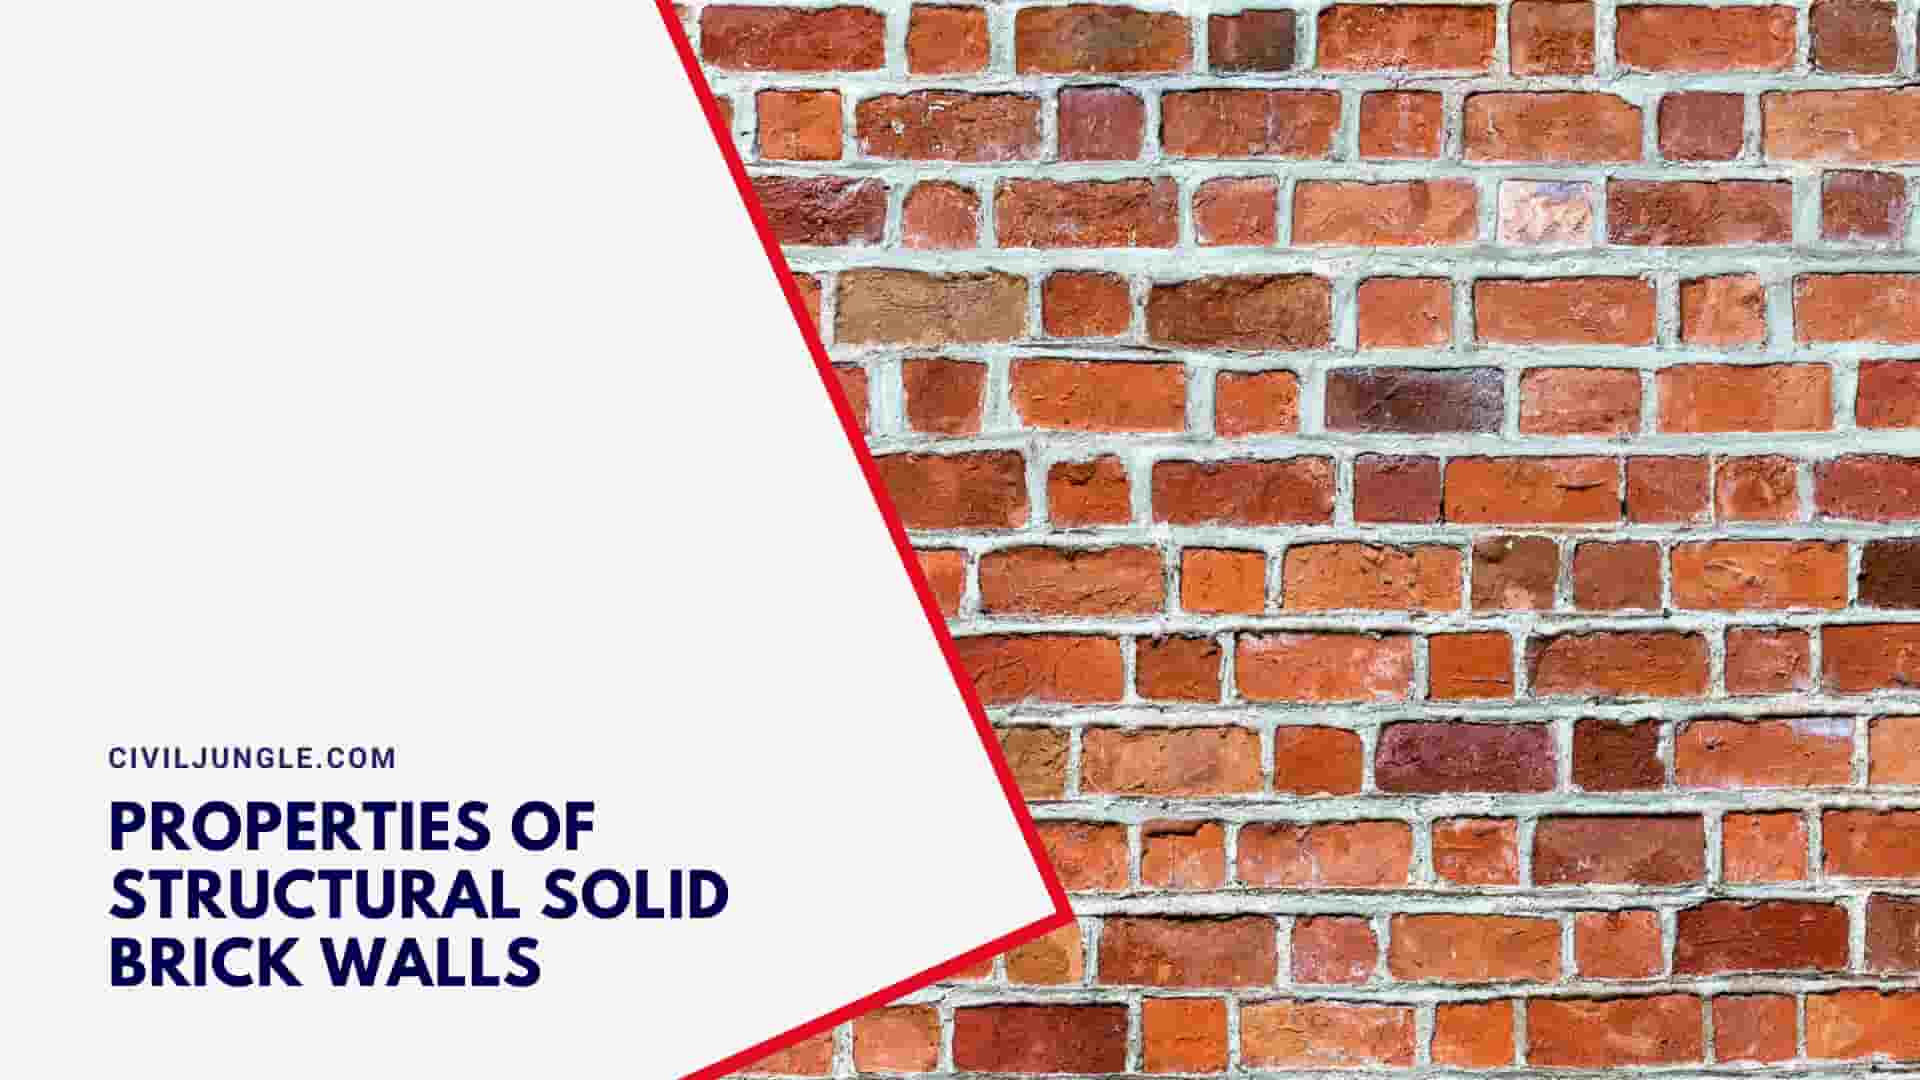 Properties of Structural Solid Brick Walls